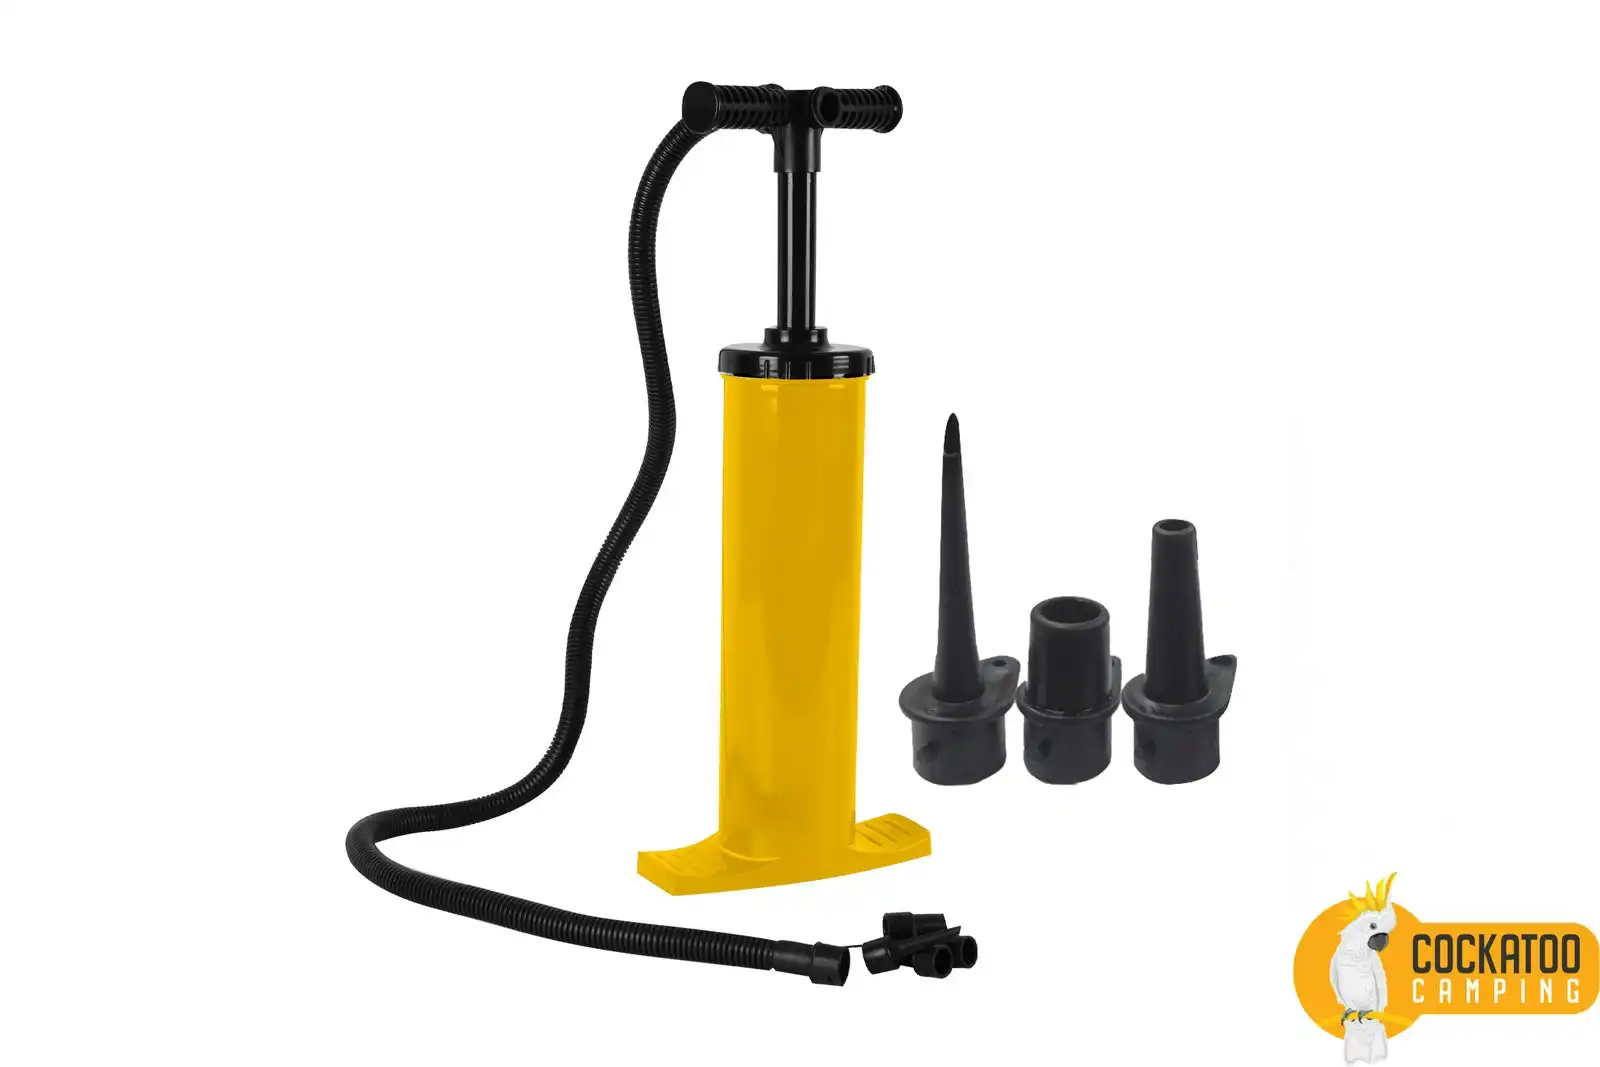 Cockatoo Camping 38cm Double Action Hand Air Pump For Mattress/Inflatable Yellow